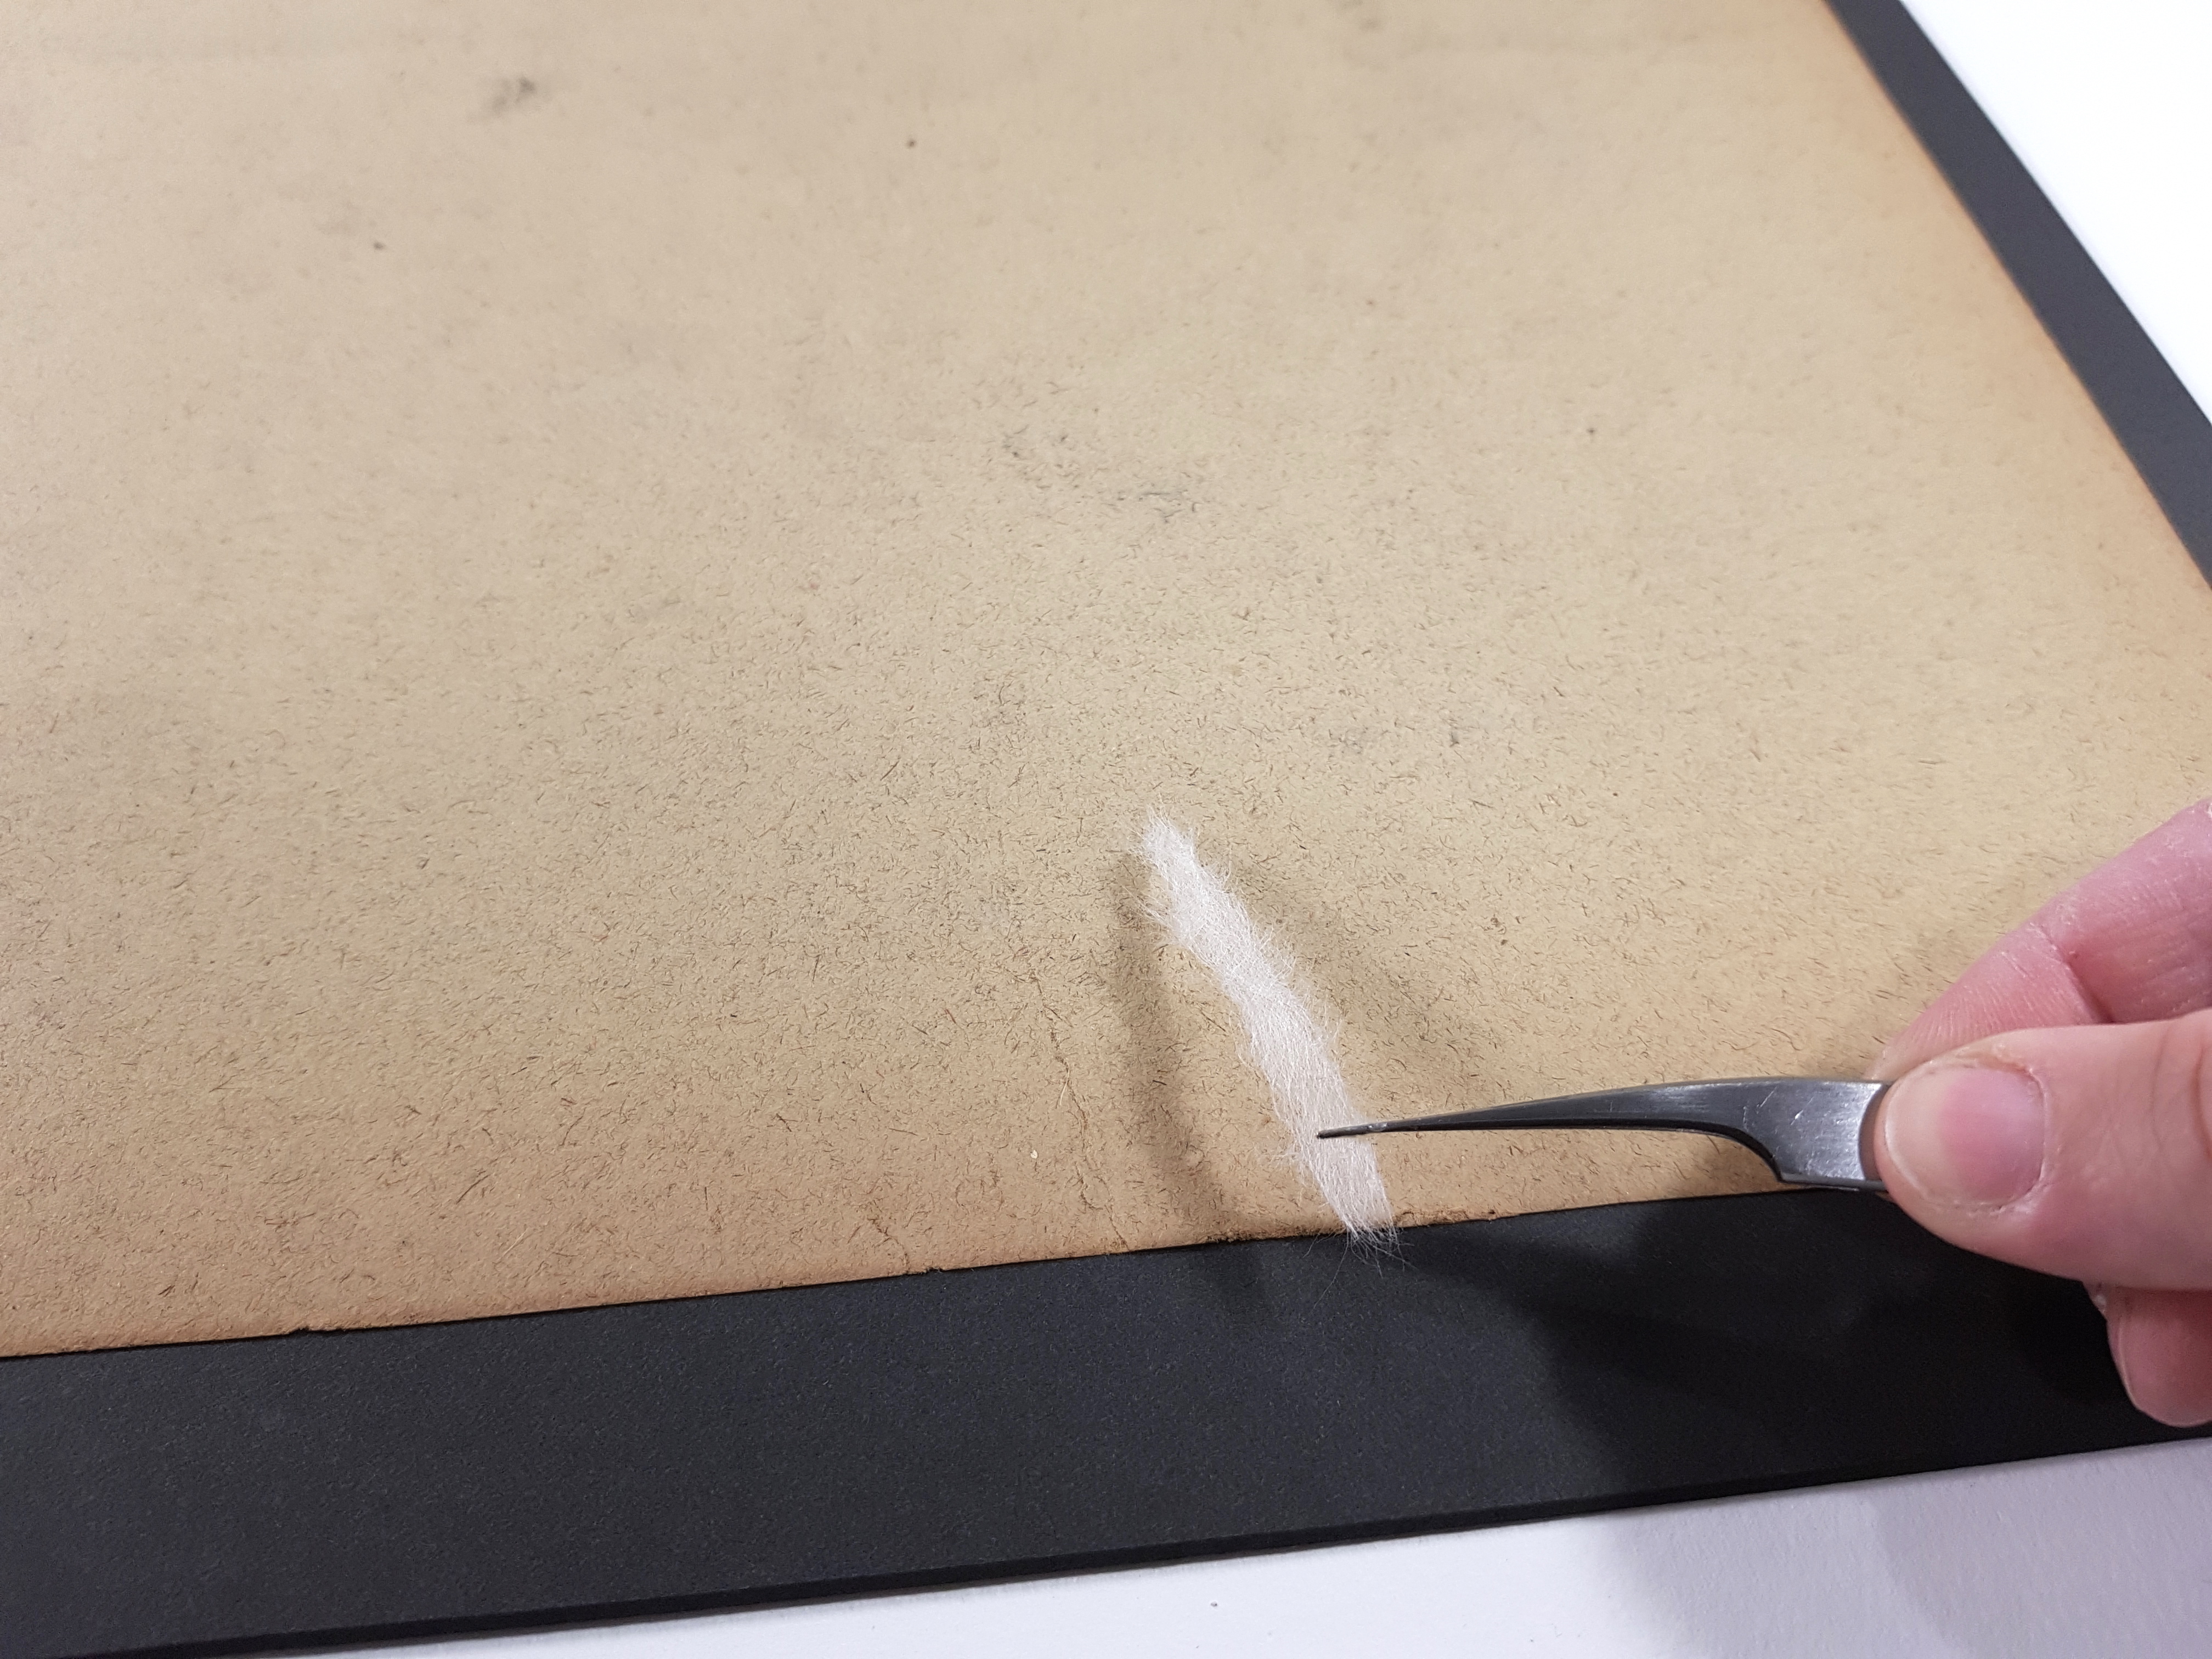 Detail photo of a thin piece of white Japanese paper being applied to the back of a tear in the drawing